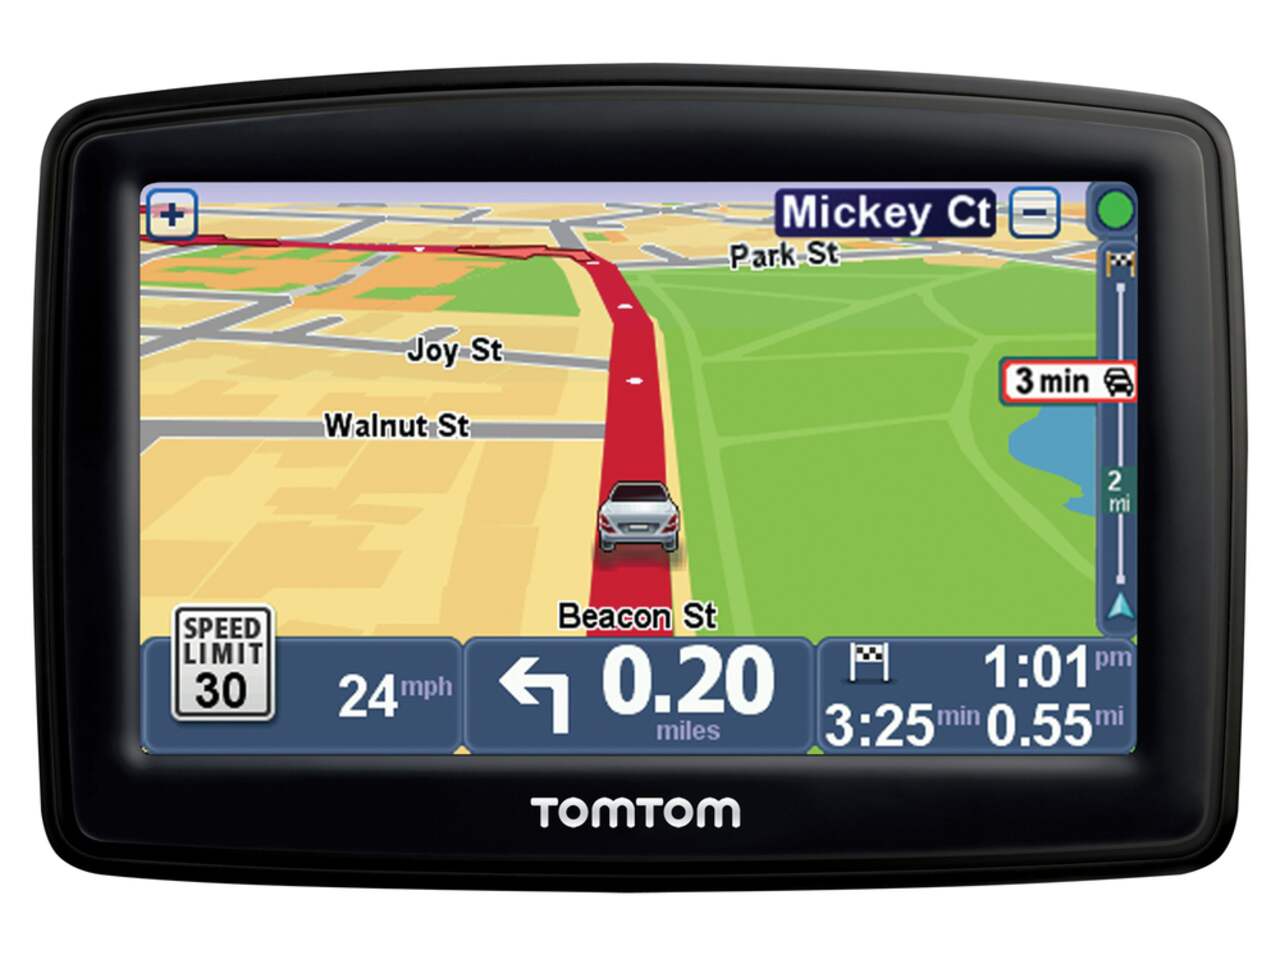 https://media-www.canadiantire.ca/product/automotive/car-care-accessories/auto-electronics/0354007/tomtom-start-45tm-gps-7d042734-792c-4d3d-9962-471f4de246ae.png?imdensity=1&imwidth=1244&impolicy=mZoom